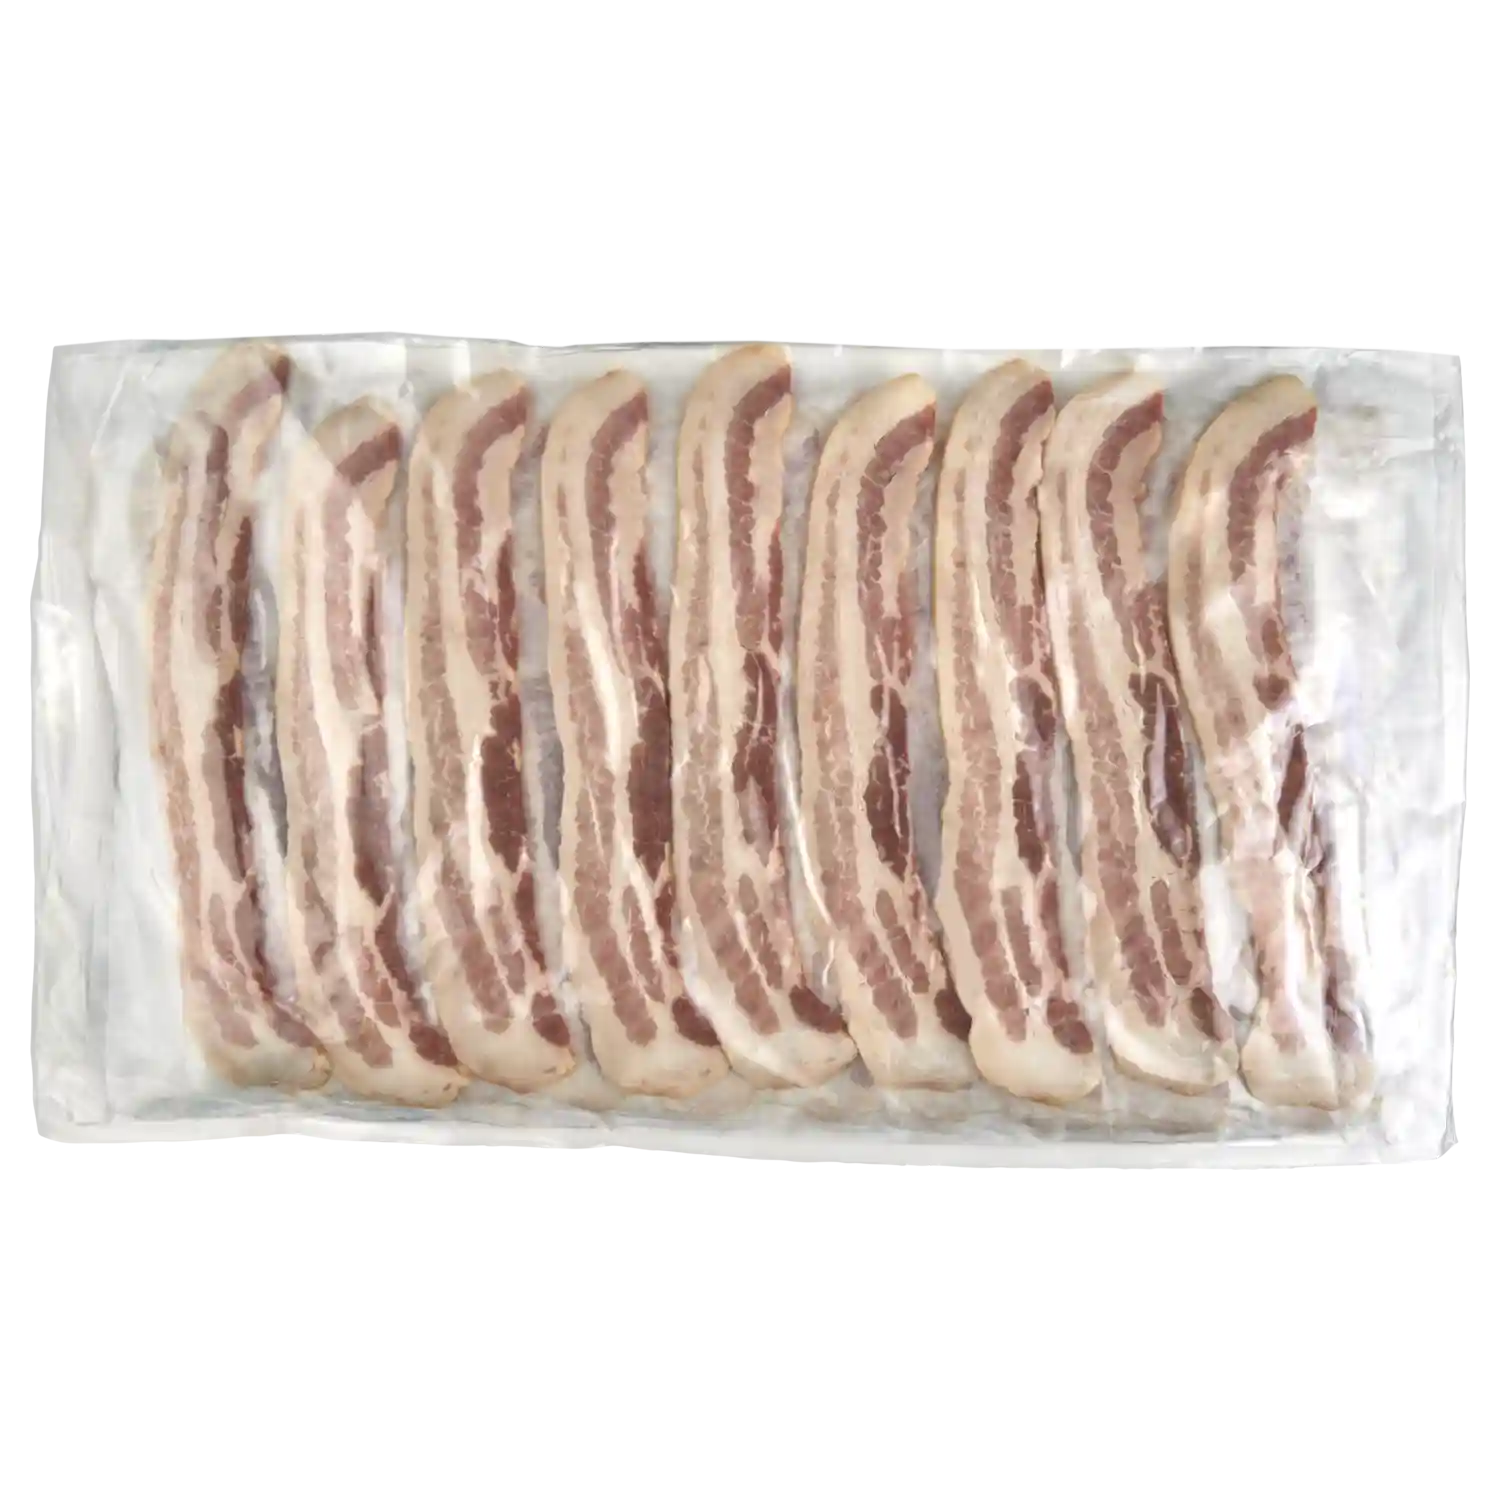 Wright® Brand Naturally Hickory Smoked Thick Sliced Bacon, Flat-Pack®, 15 Lbs, 10-14 Slices per Pound, Gas Flushed_image_31